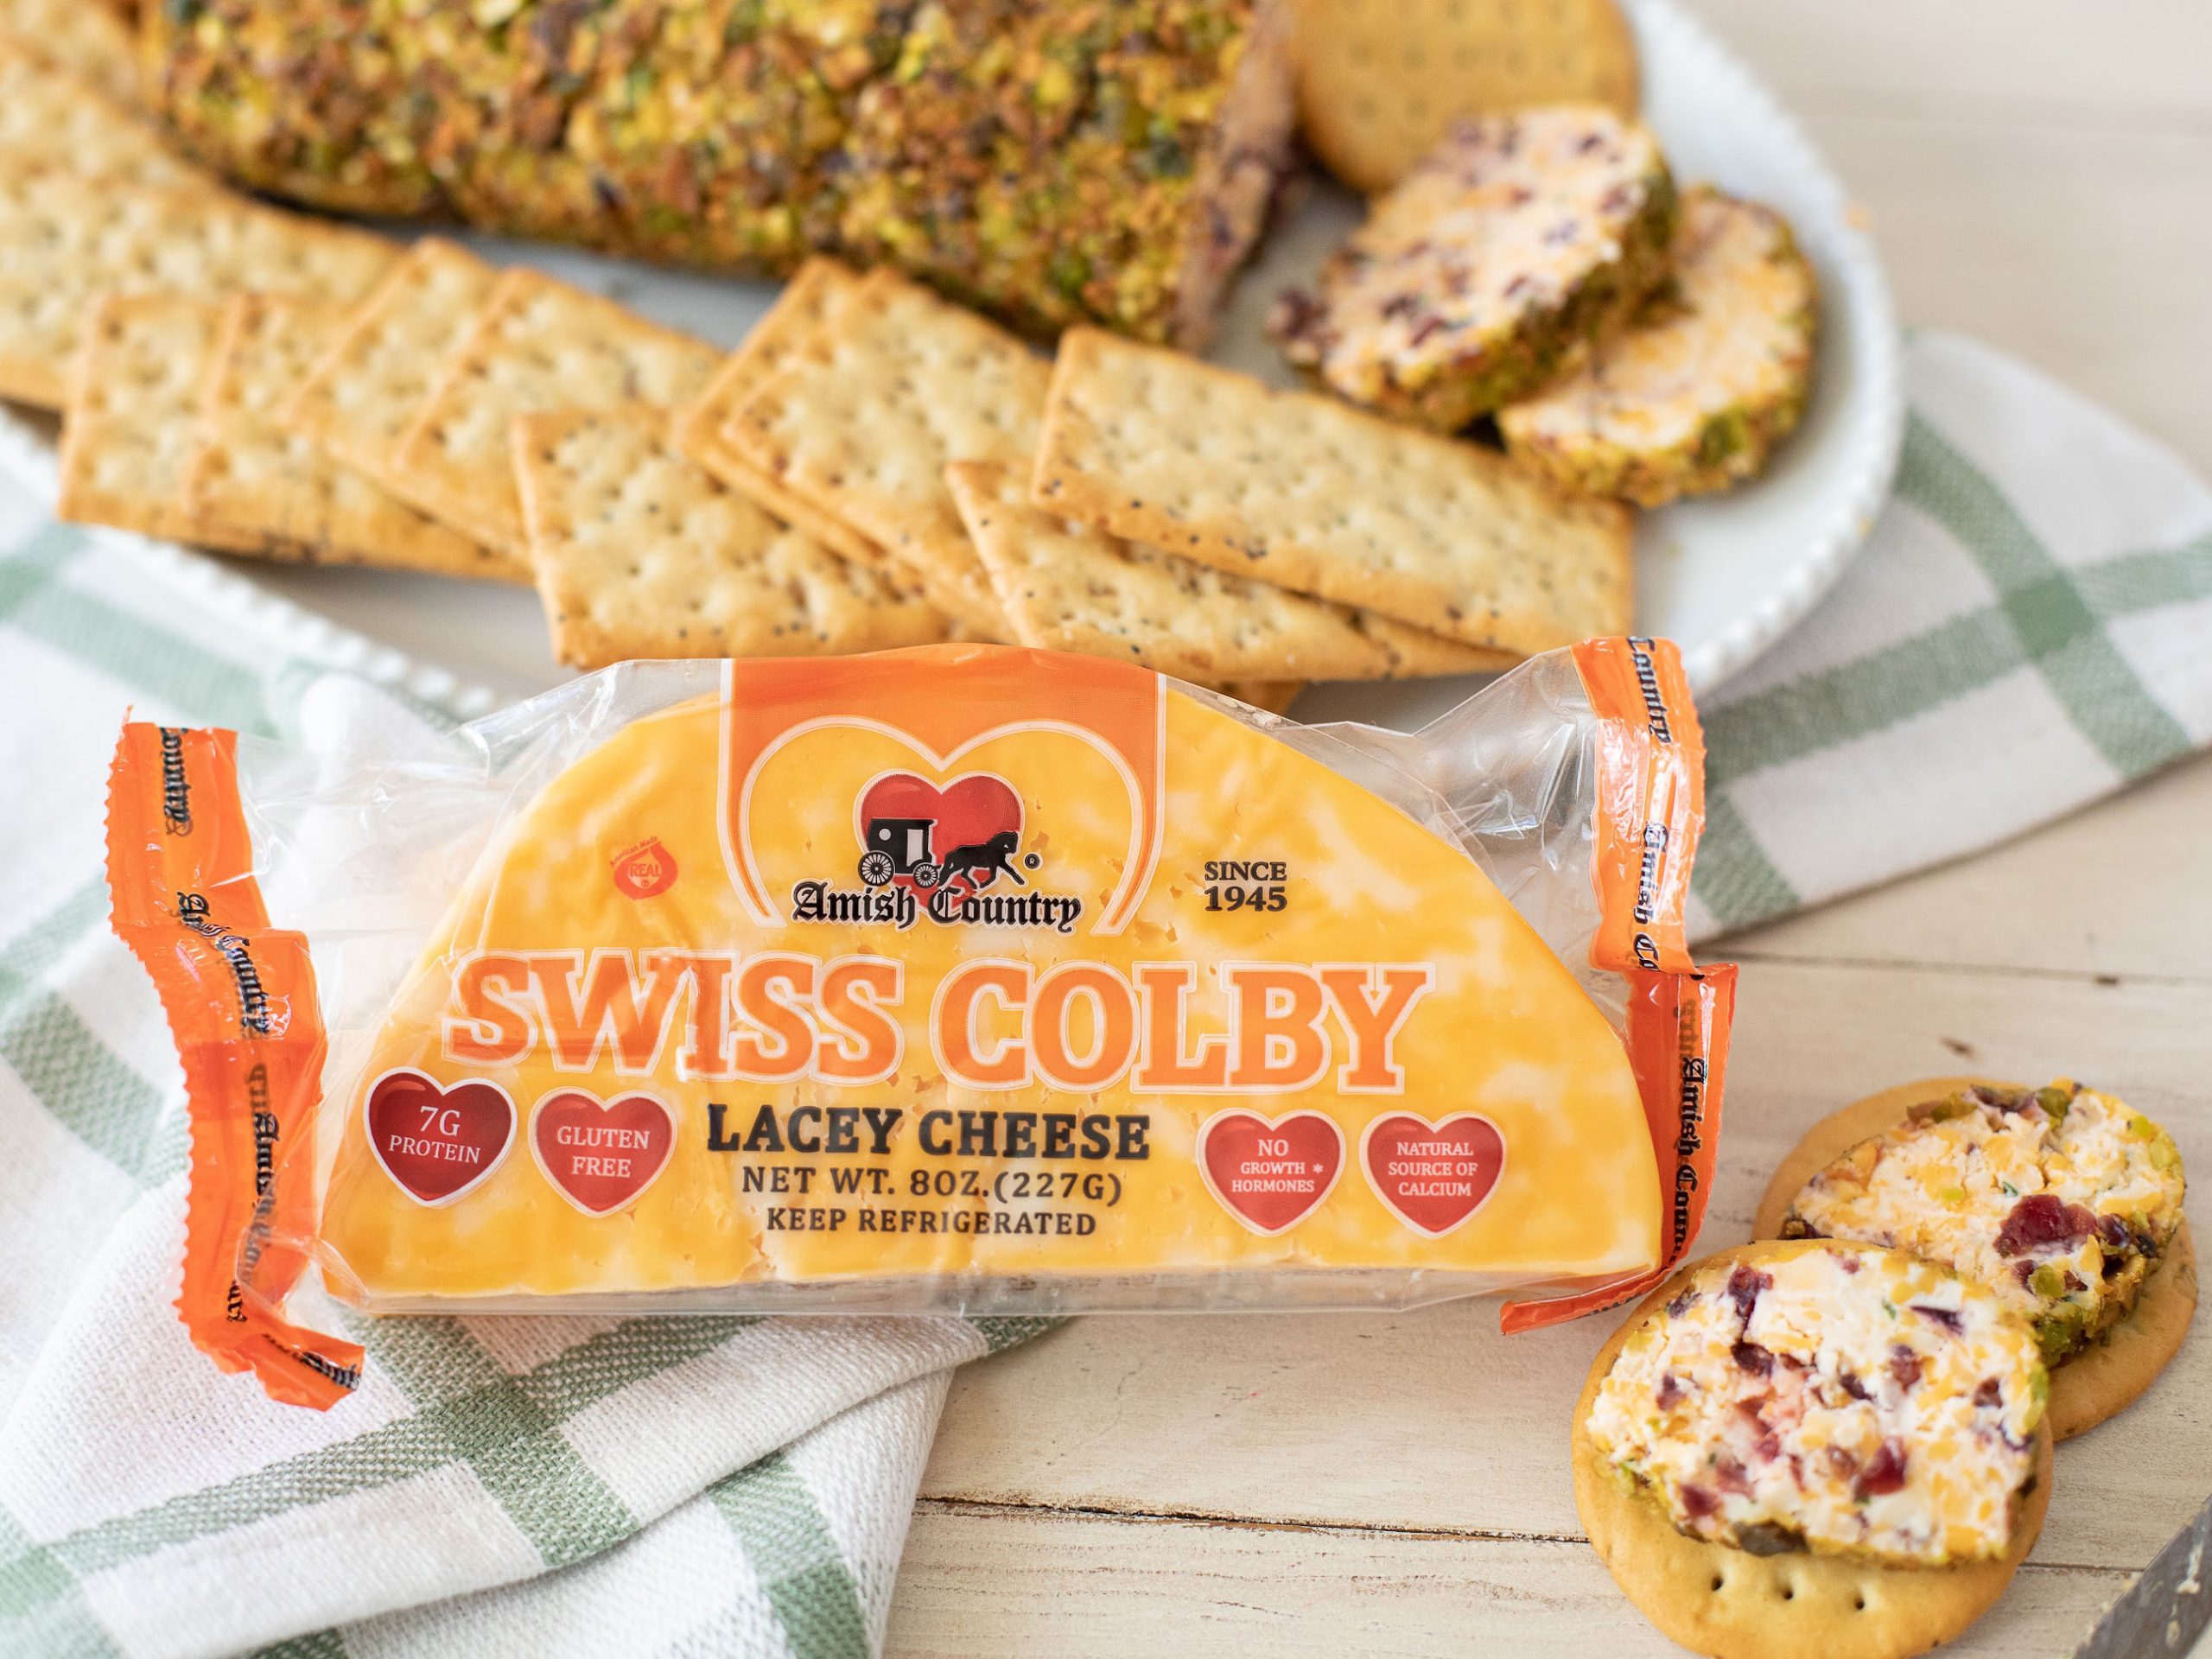 Have Plenty Of Amish Country Cheese On Hand For Your Holiday Entertaining - Try My Cranberry Pistachio Swiss Colby Cheese Log on I Heart Publix 2